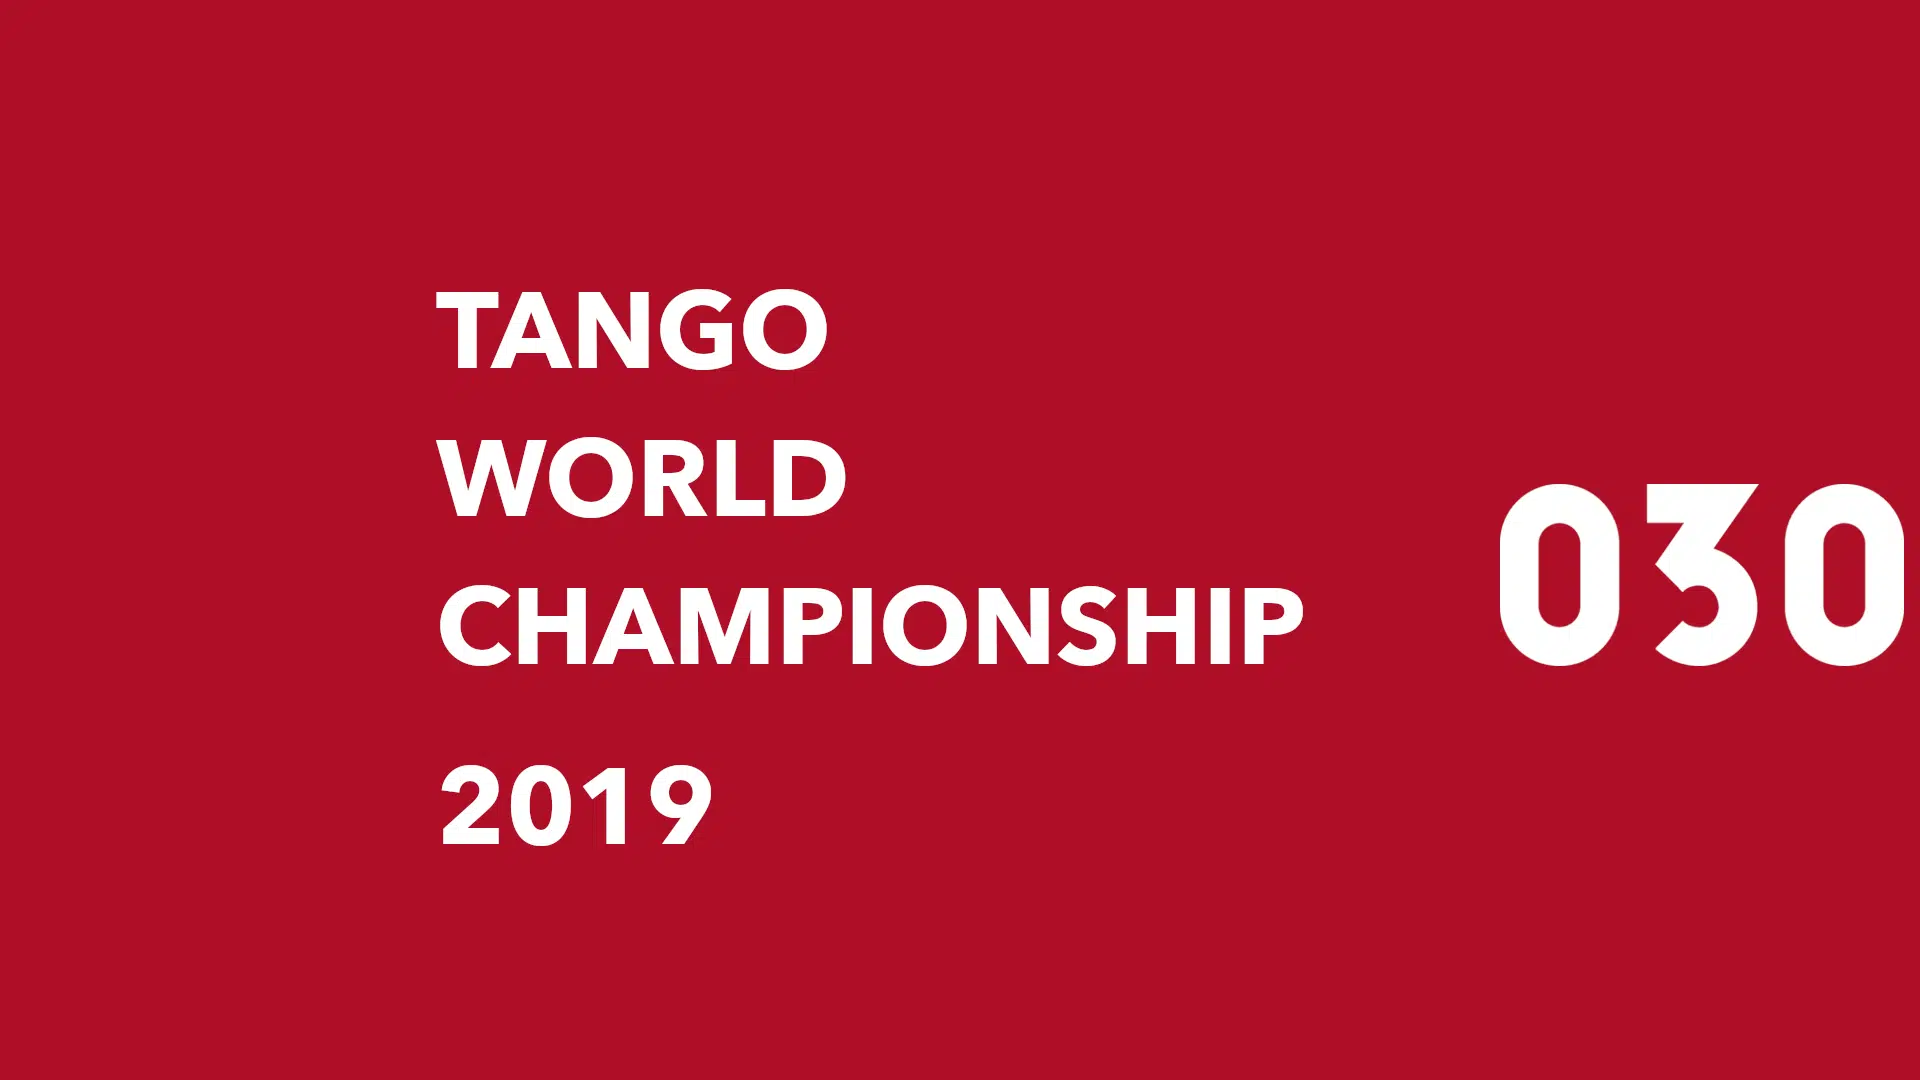 Tango World Championship 2019 preview picture